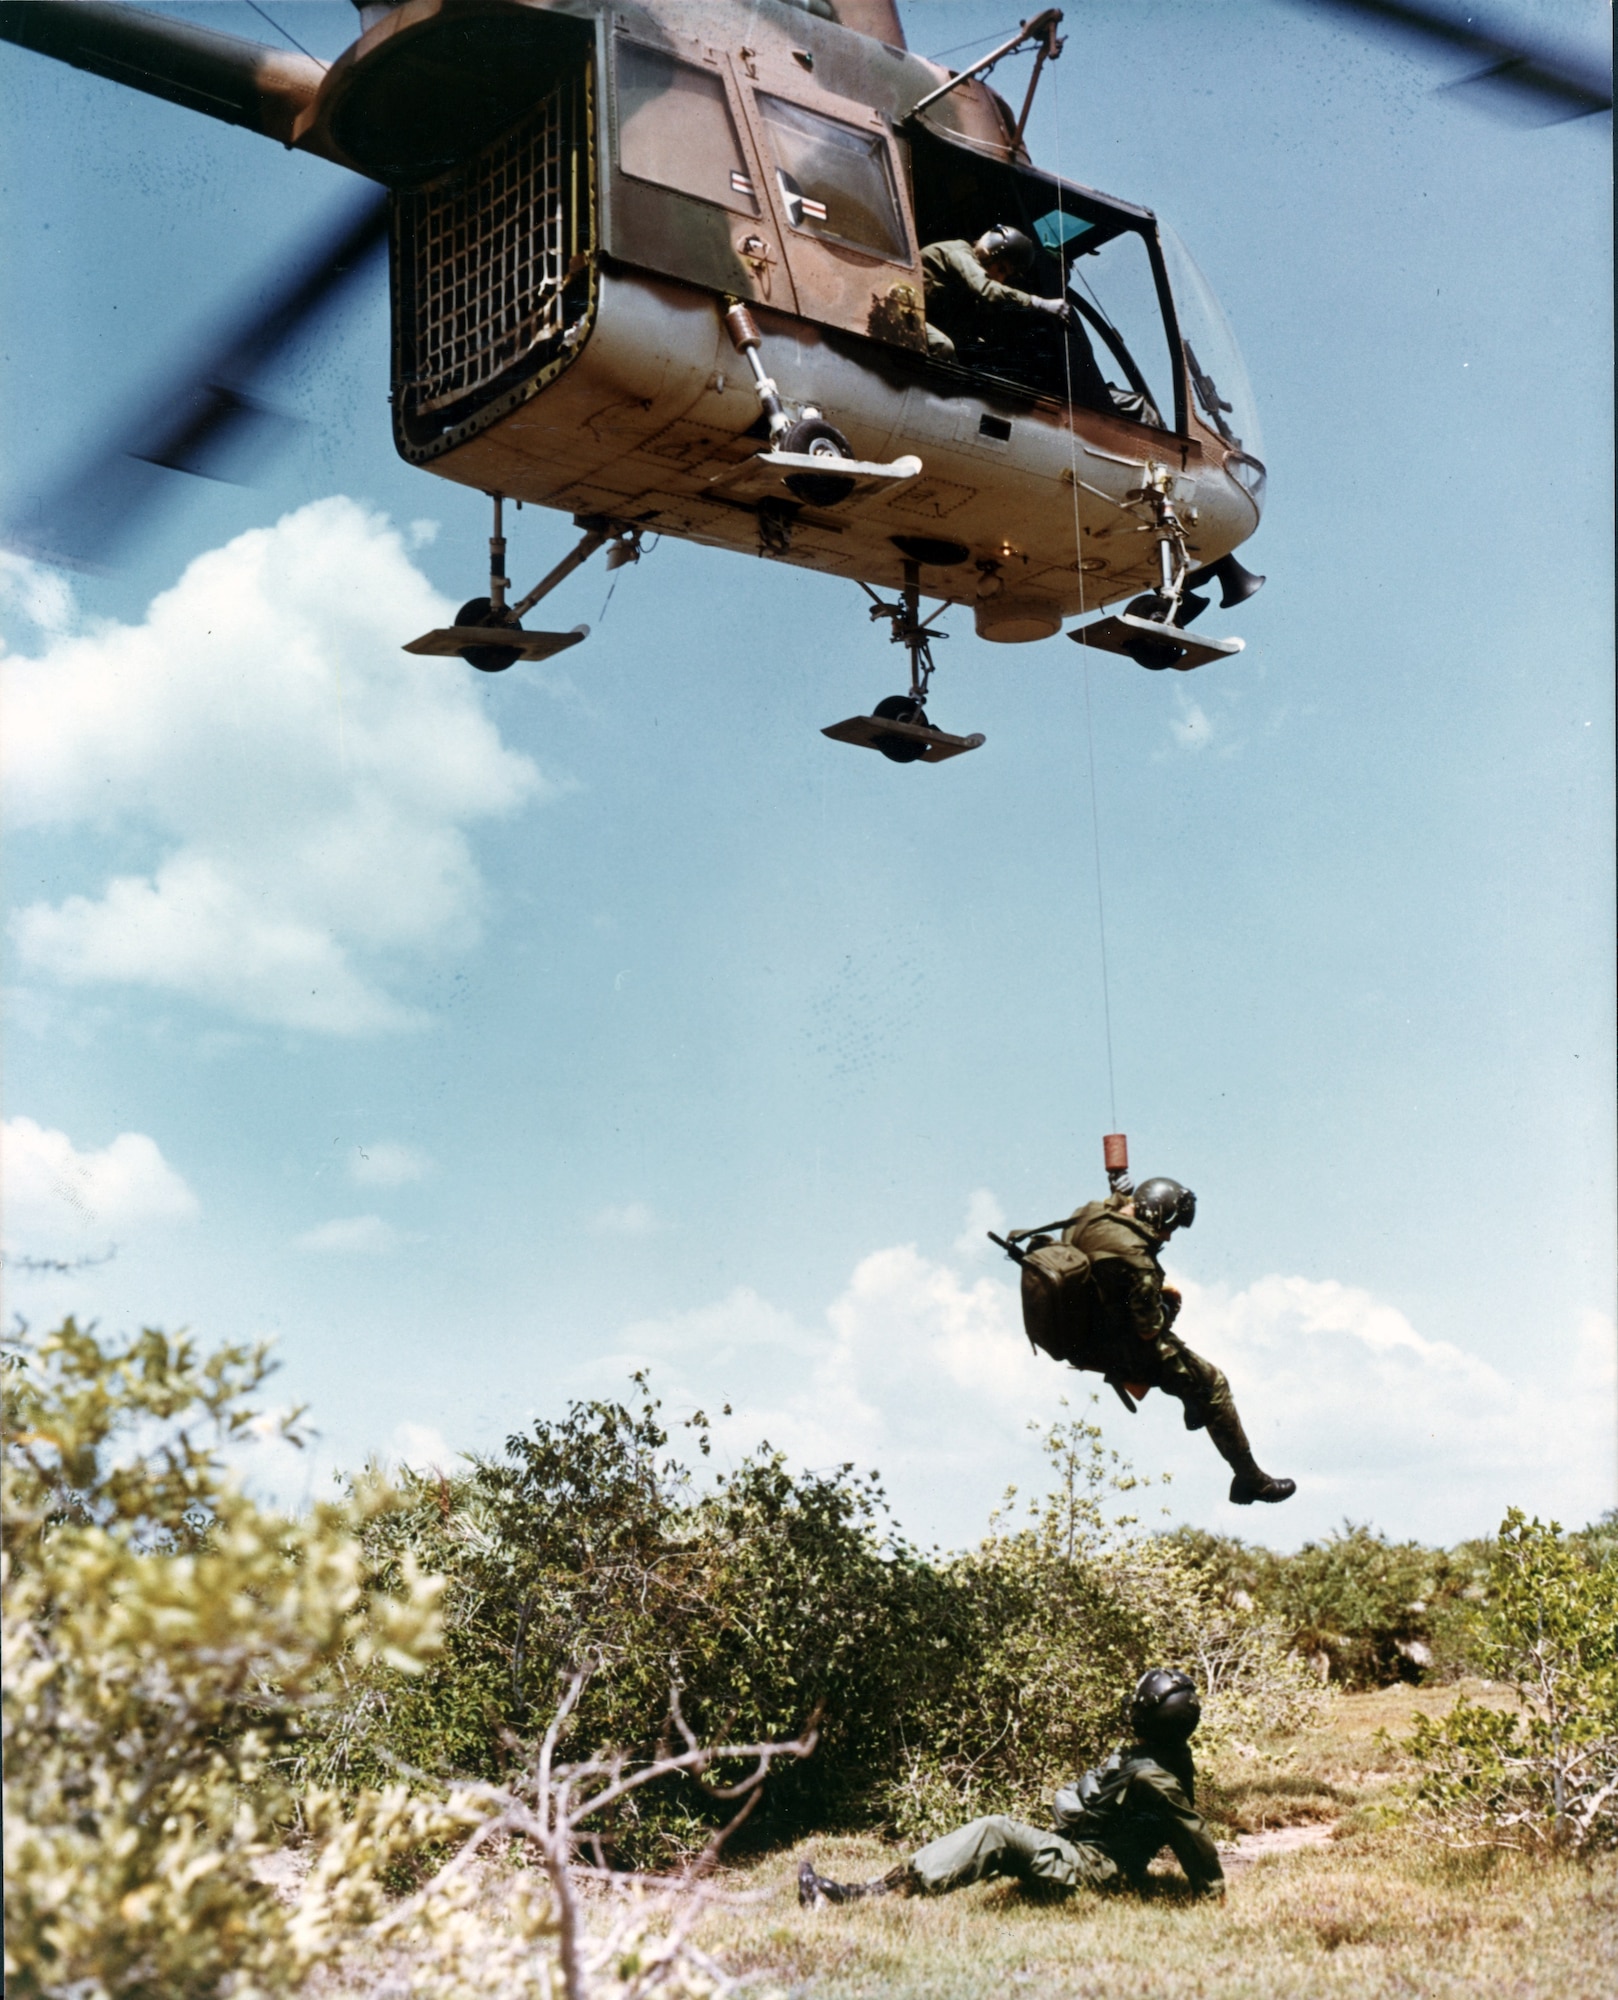 An Air Force pararescue specialist is lowered on a forest penetrator from an HH-43 to treat an injured pilot in Southeast Asia.